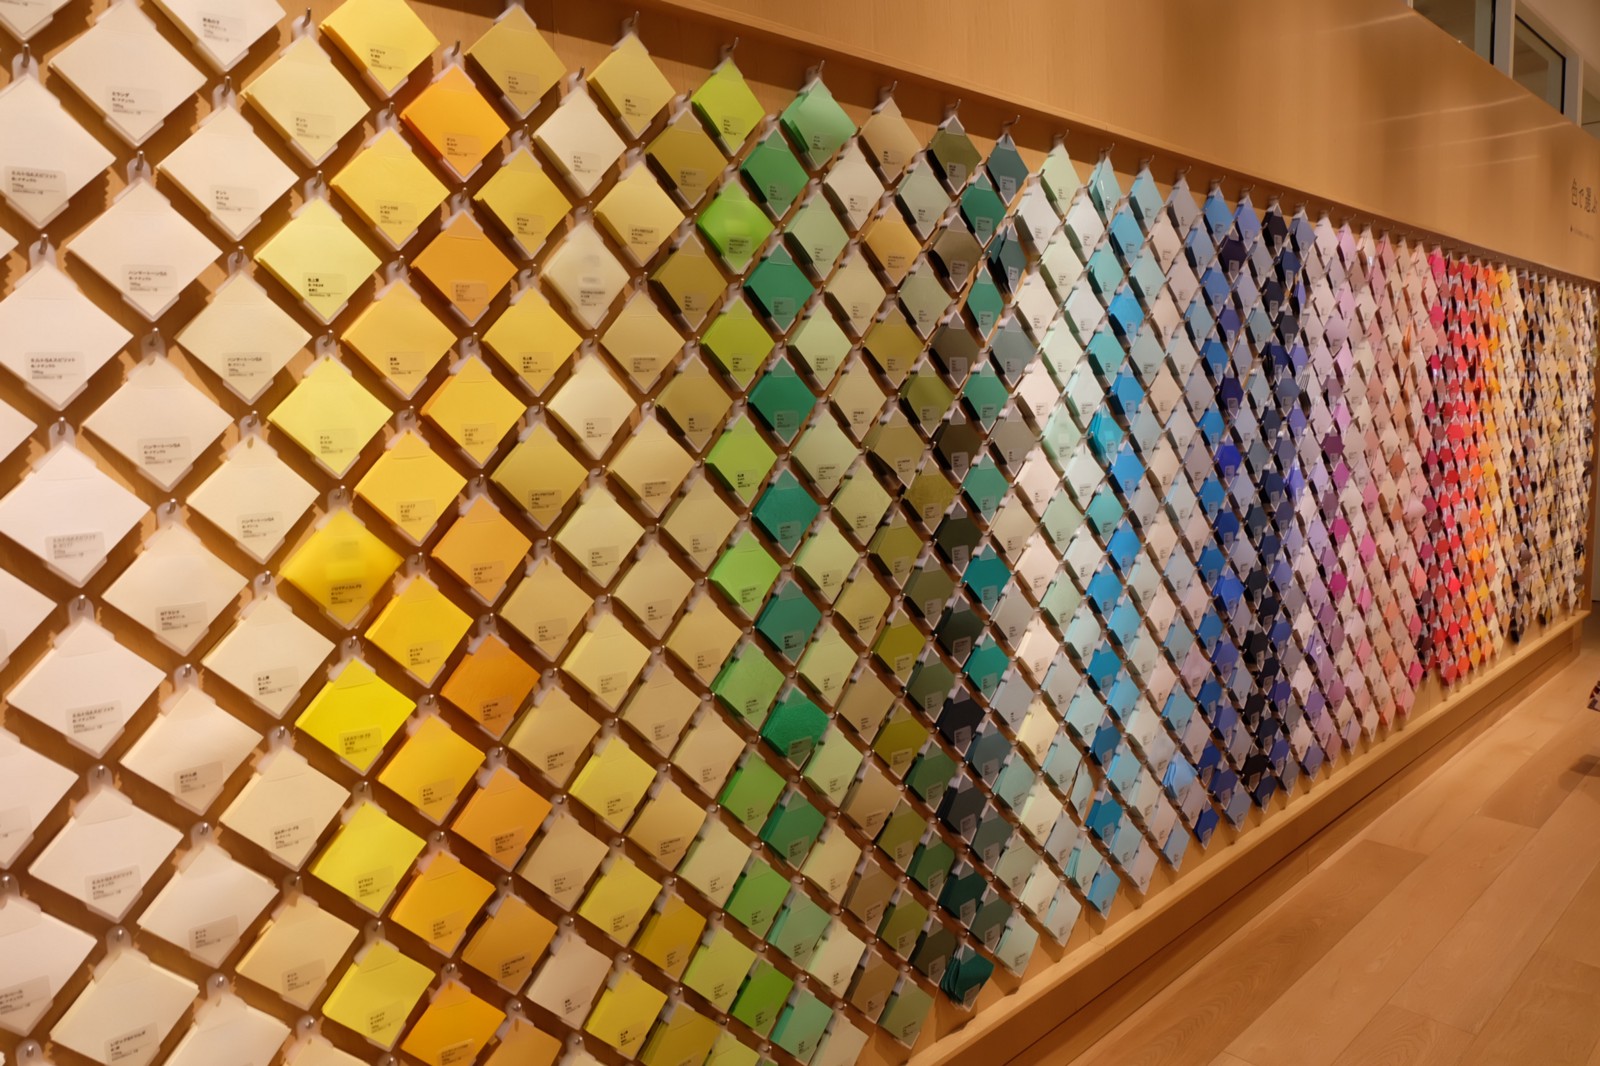 Ginza itoya : the Best Stationery Store in Tokyo - Japan Web